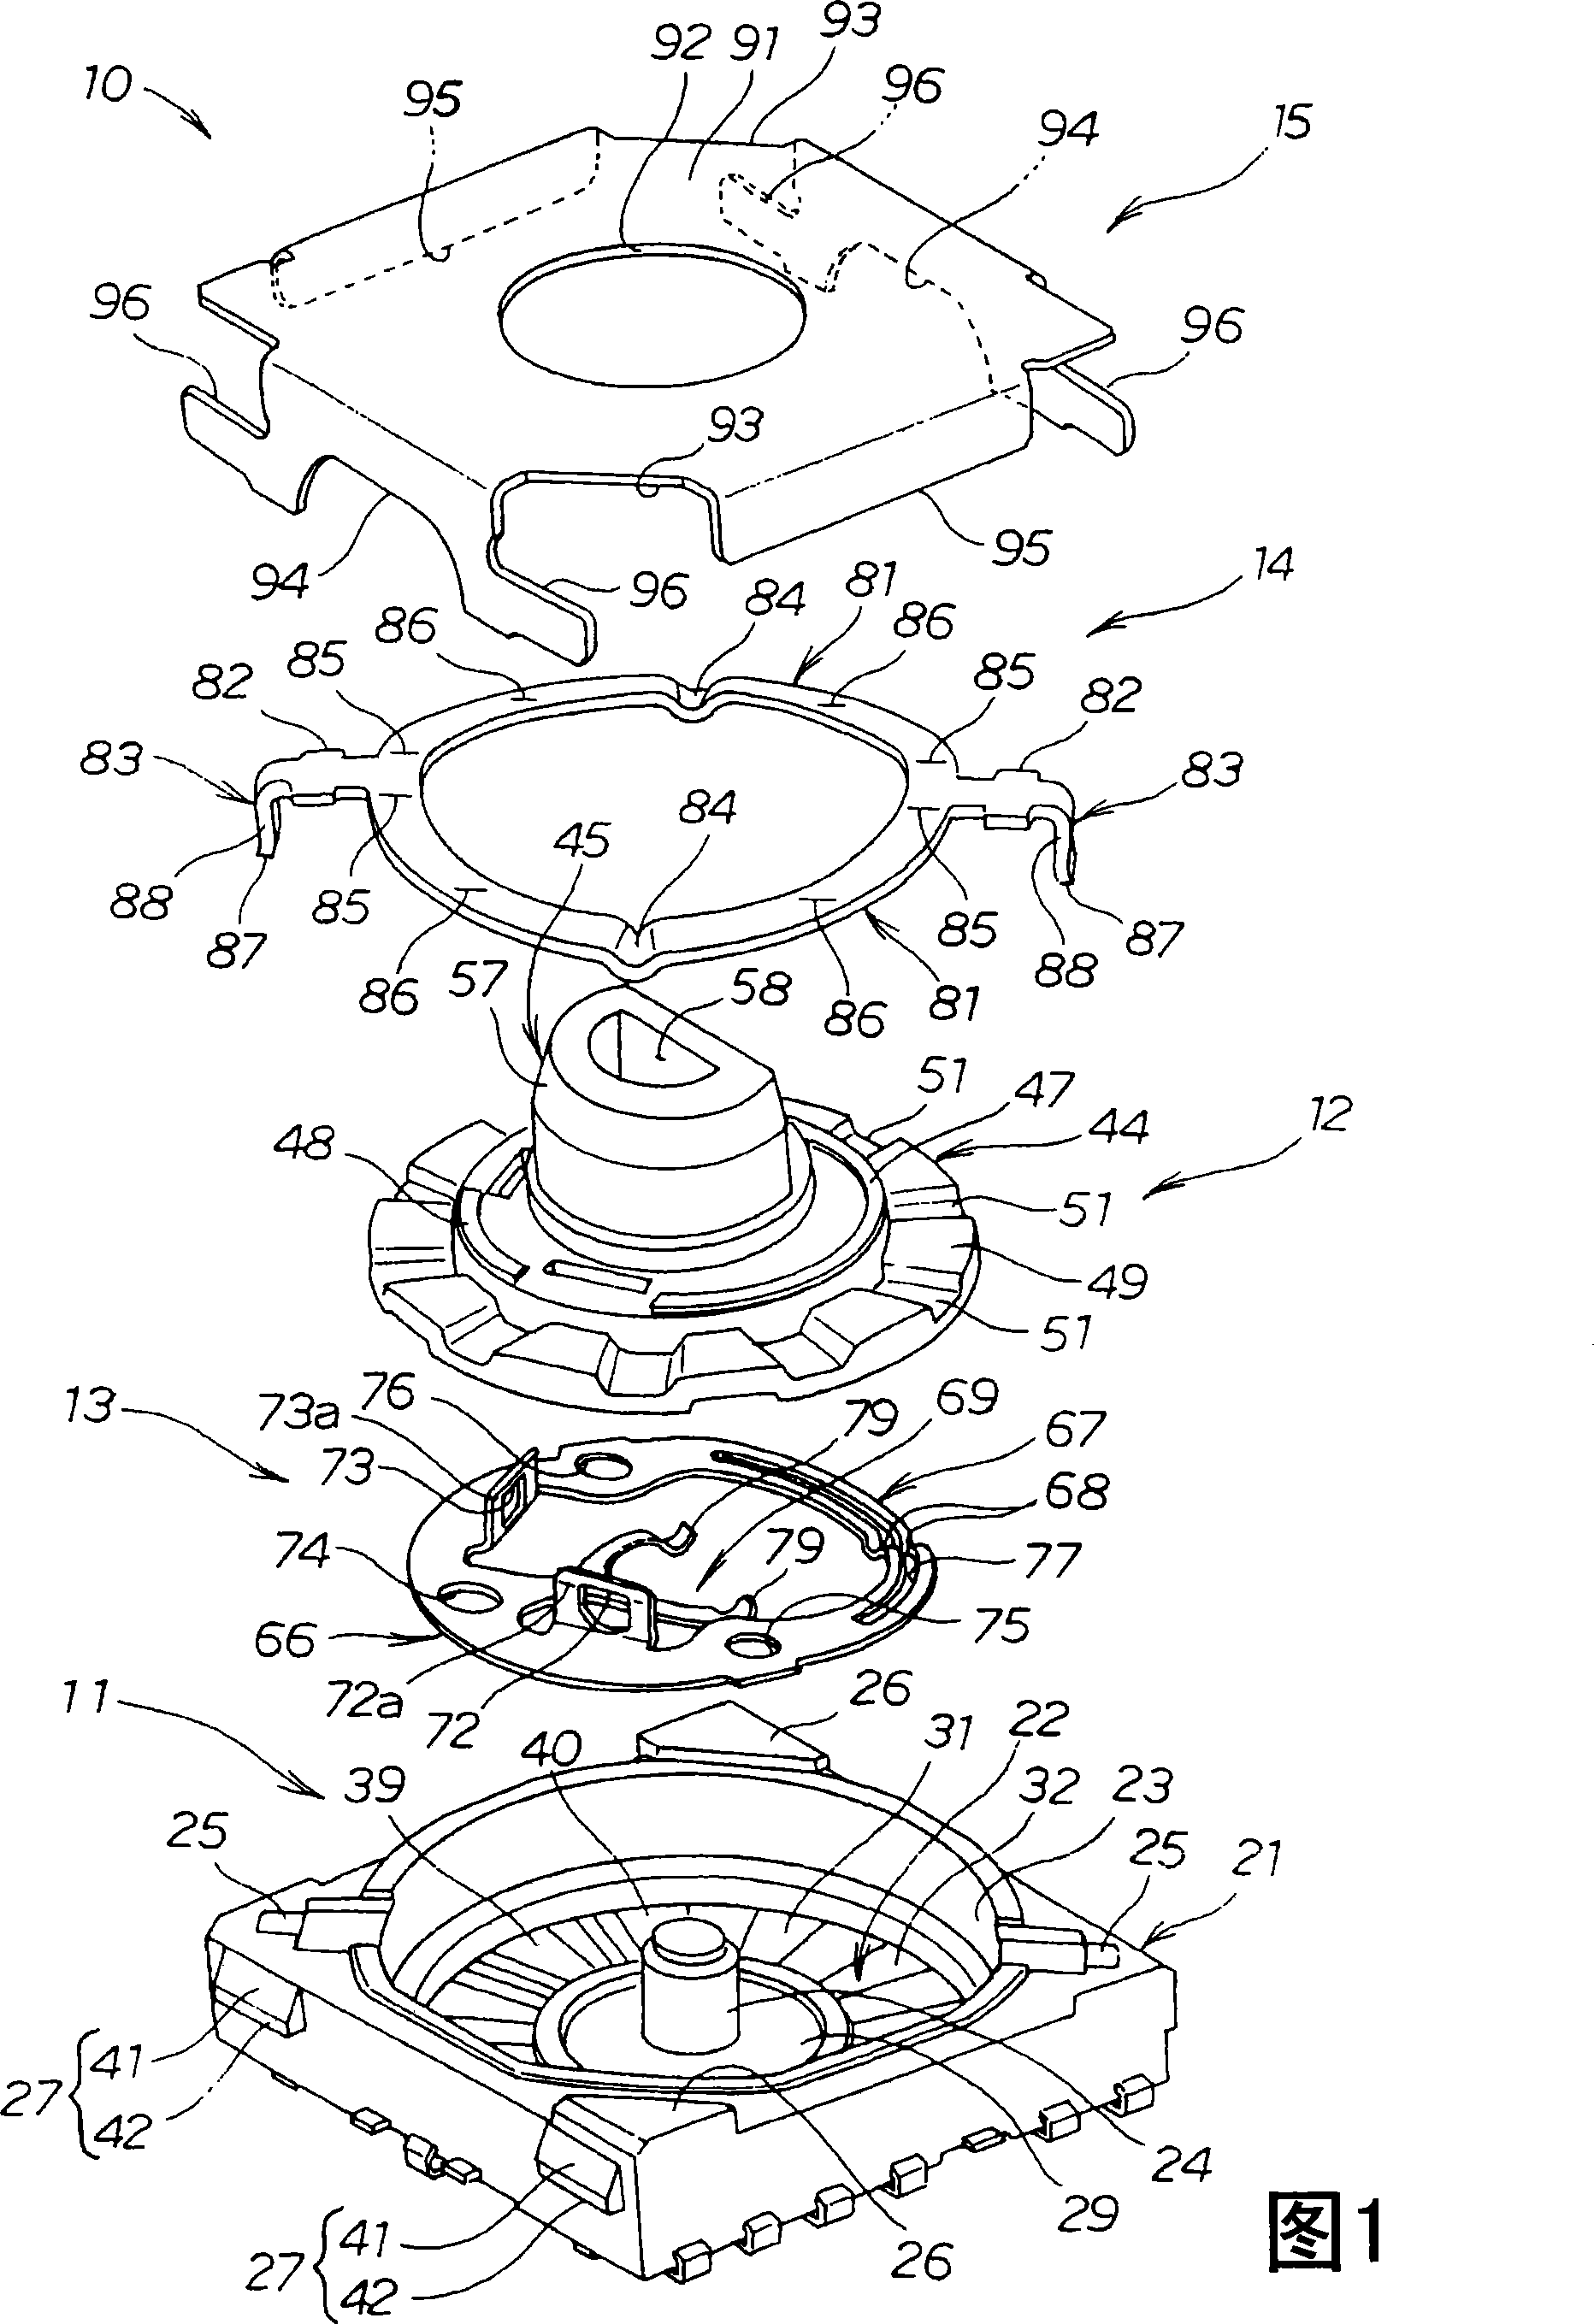 Rotating switch